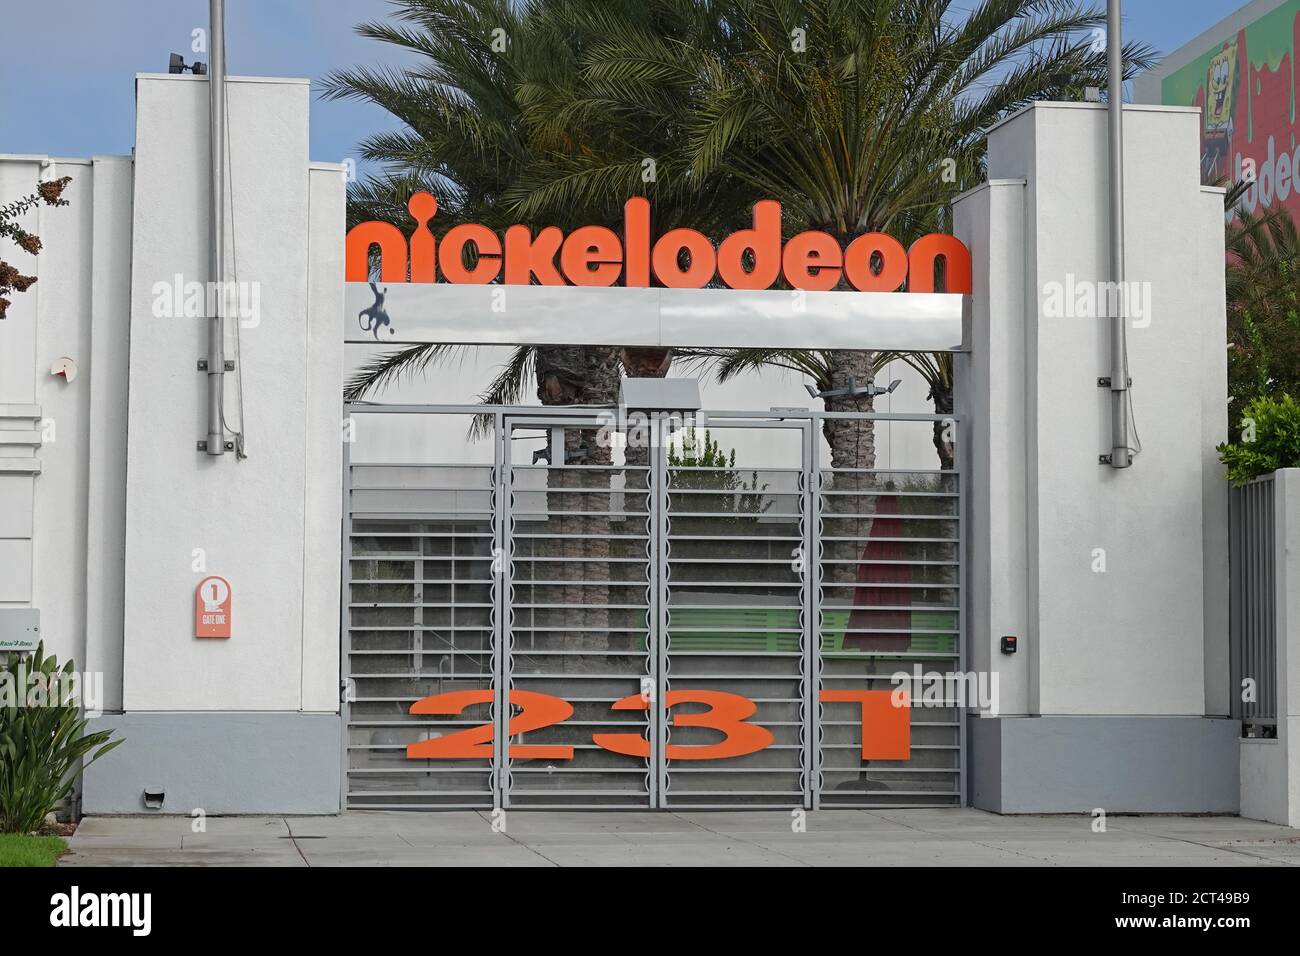 Burbank, CA / USA - Aug. 30, 2020: The front entrance of Nickelodeon Animation Studios is shown during a summer day. For editorial uses only. Stock Photo